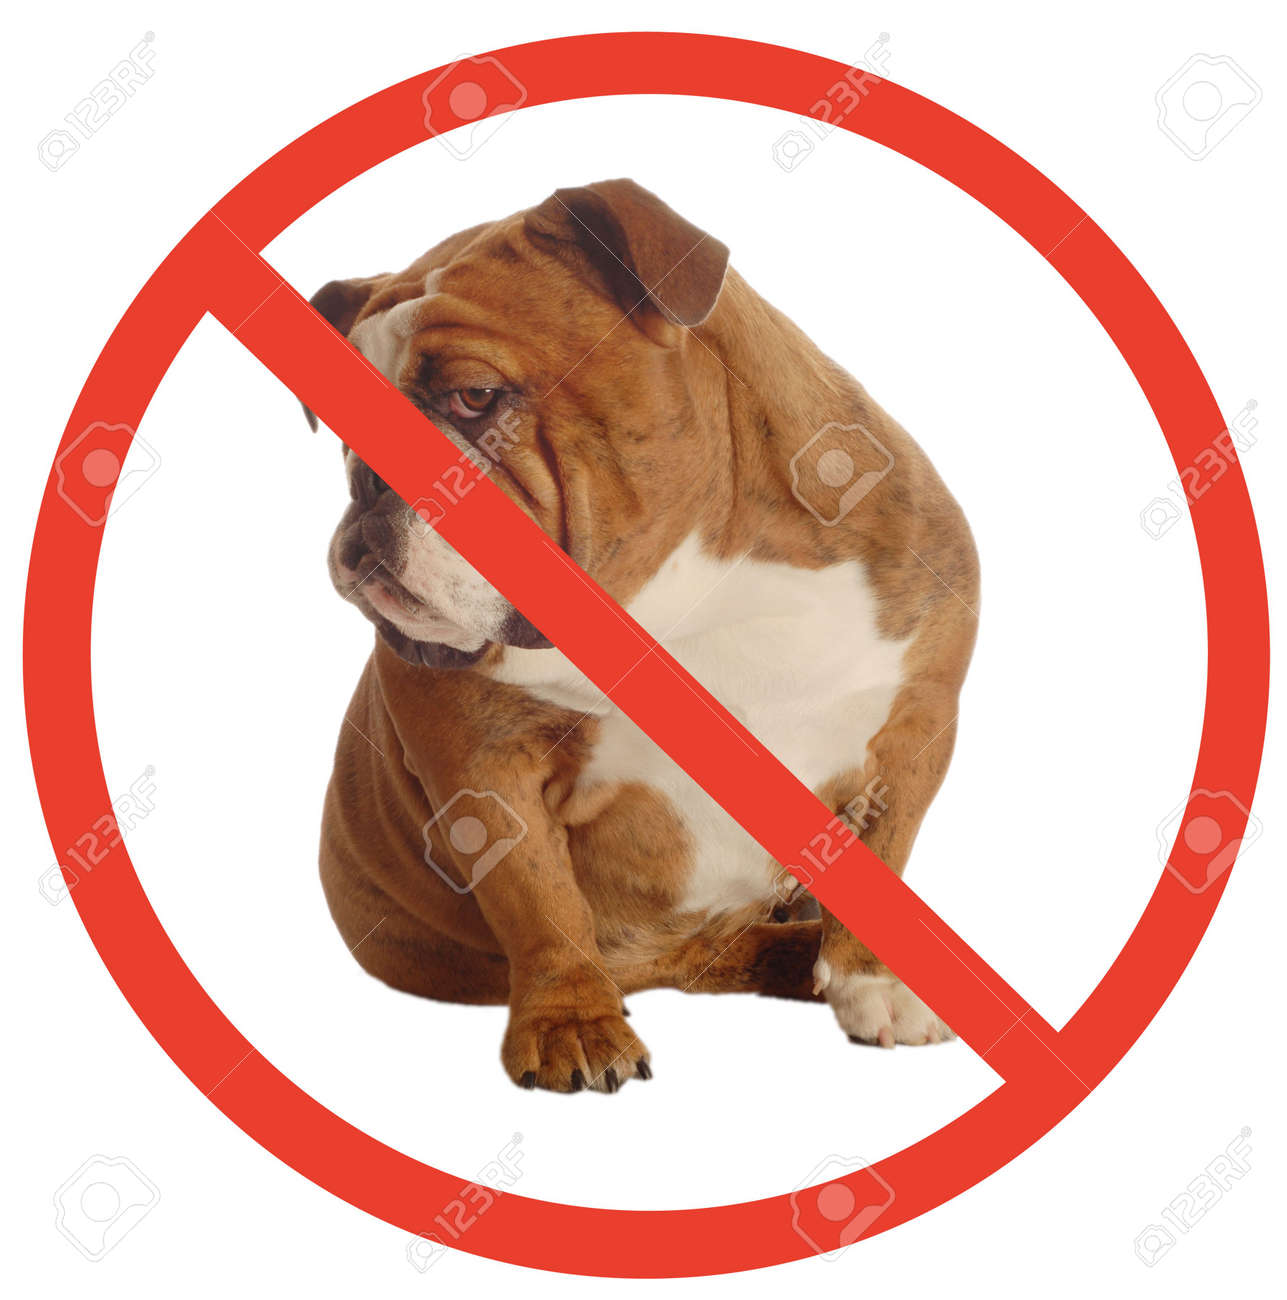 3785570-no-dogs-allowed-sign-with-an-annoyed-english-bulldog-as-the-dog-Stock-Photo.jpg